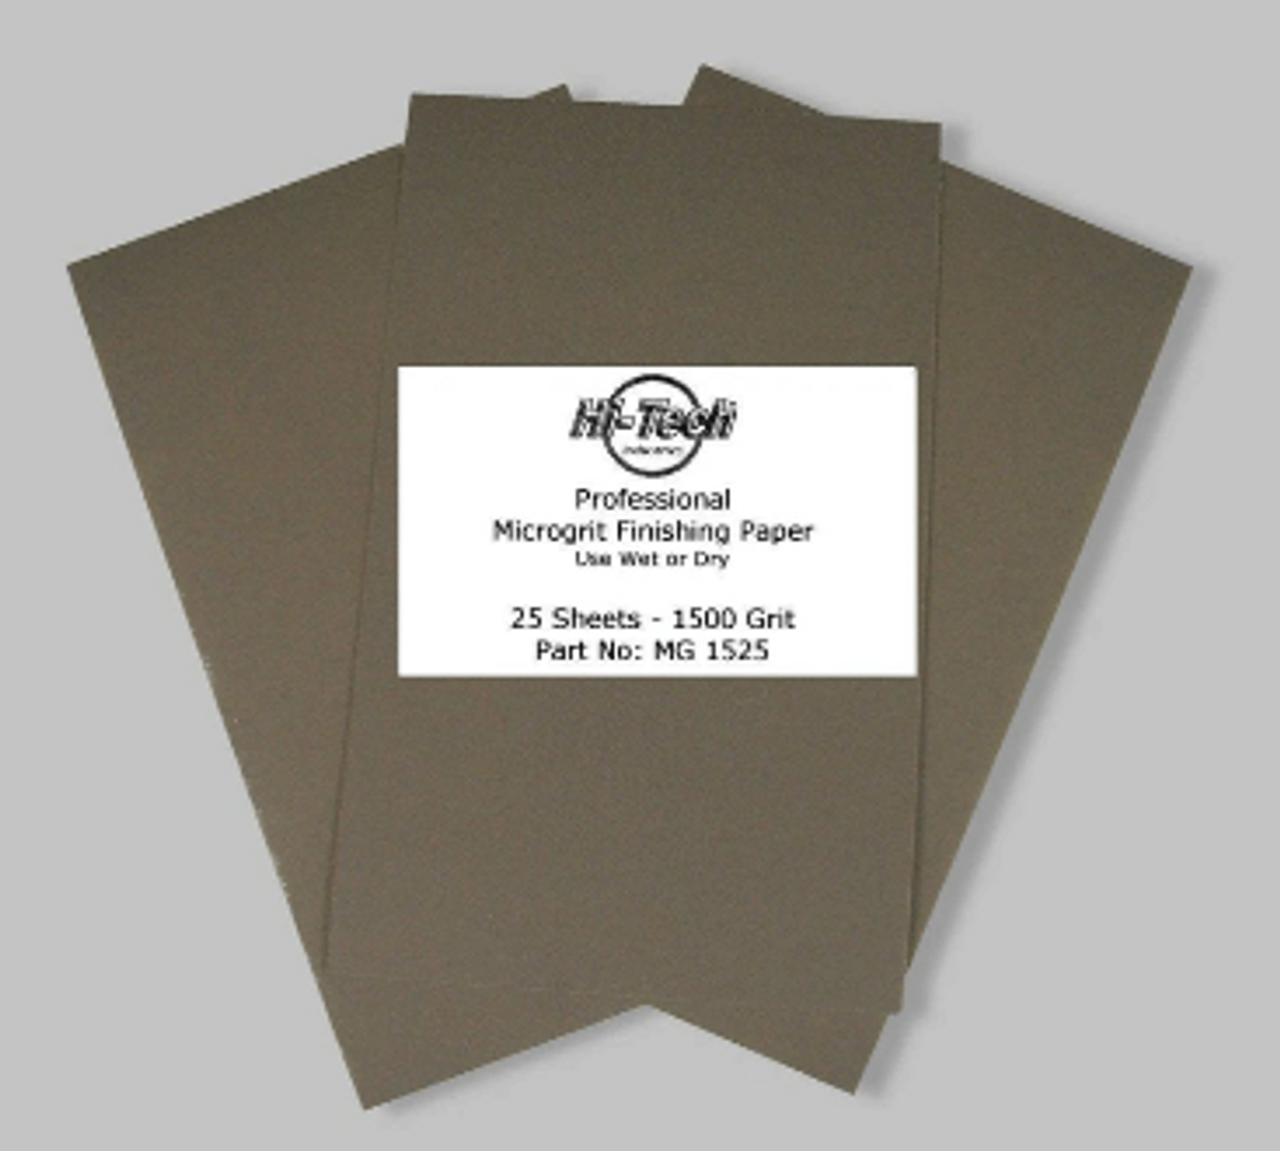 Microgrit Wet/Dry Finishing Paper - 1500 Grit - 25 Pack - 9"x5.5"